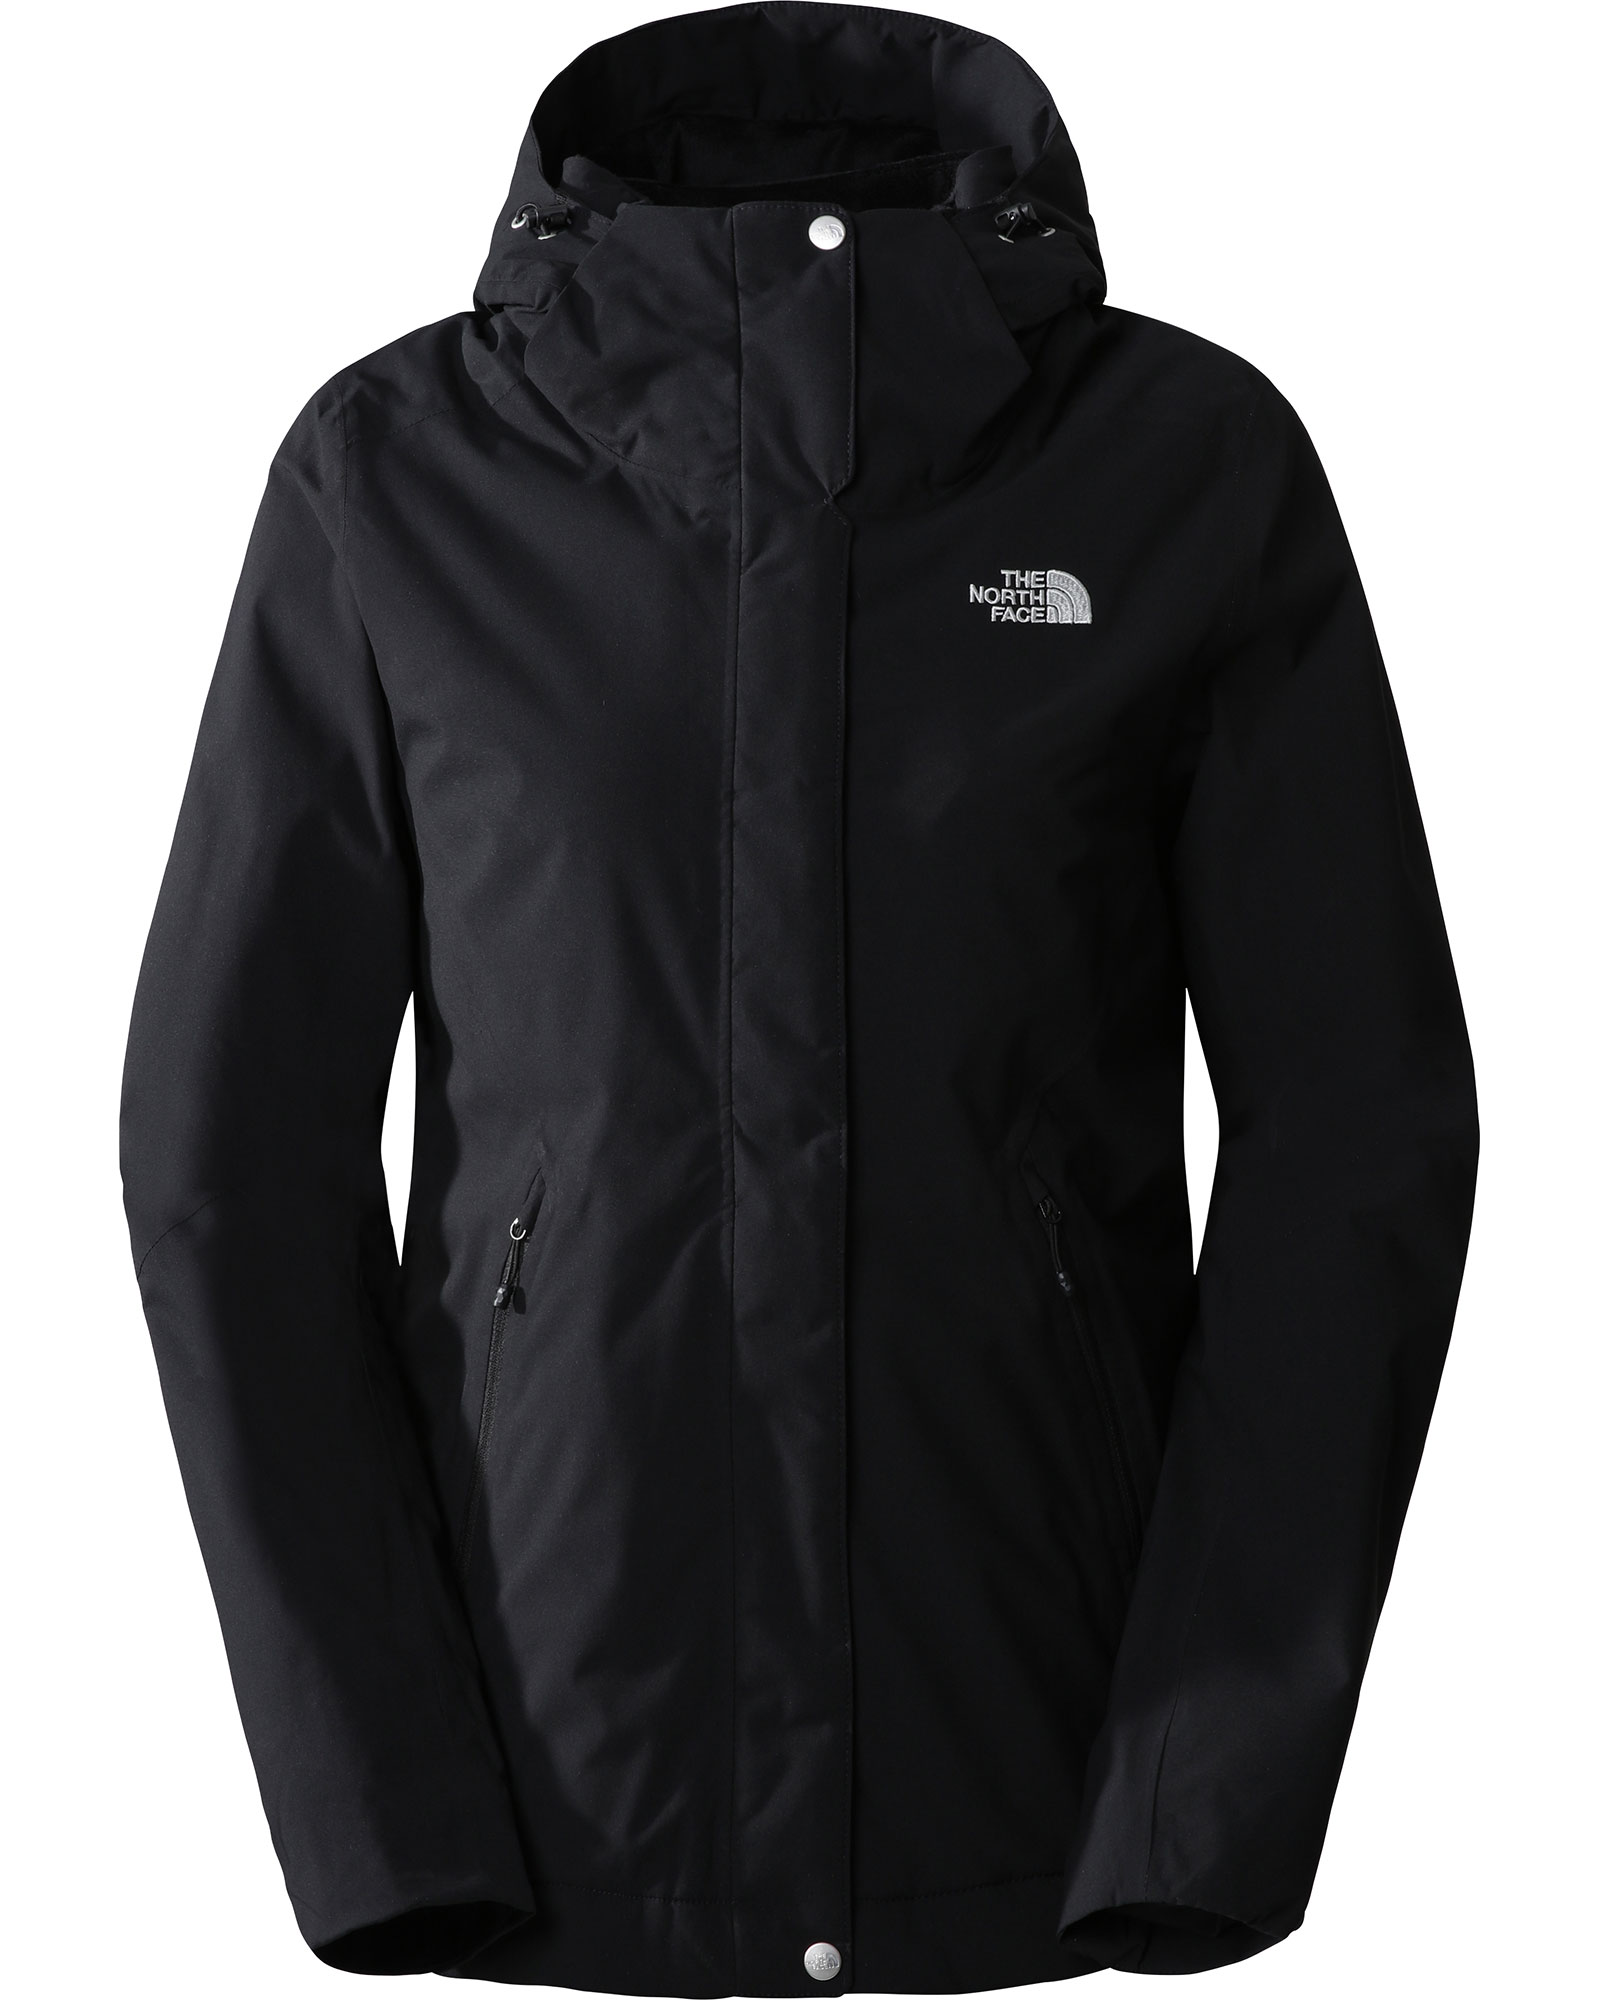 The North Face Inlux Insulated DryVent Women’s Insulated Jacket - TNF Black S